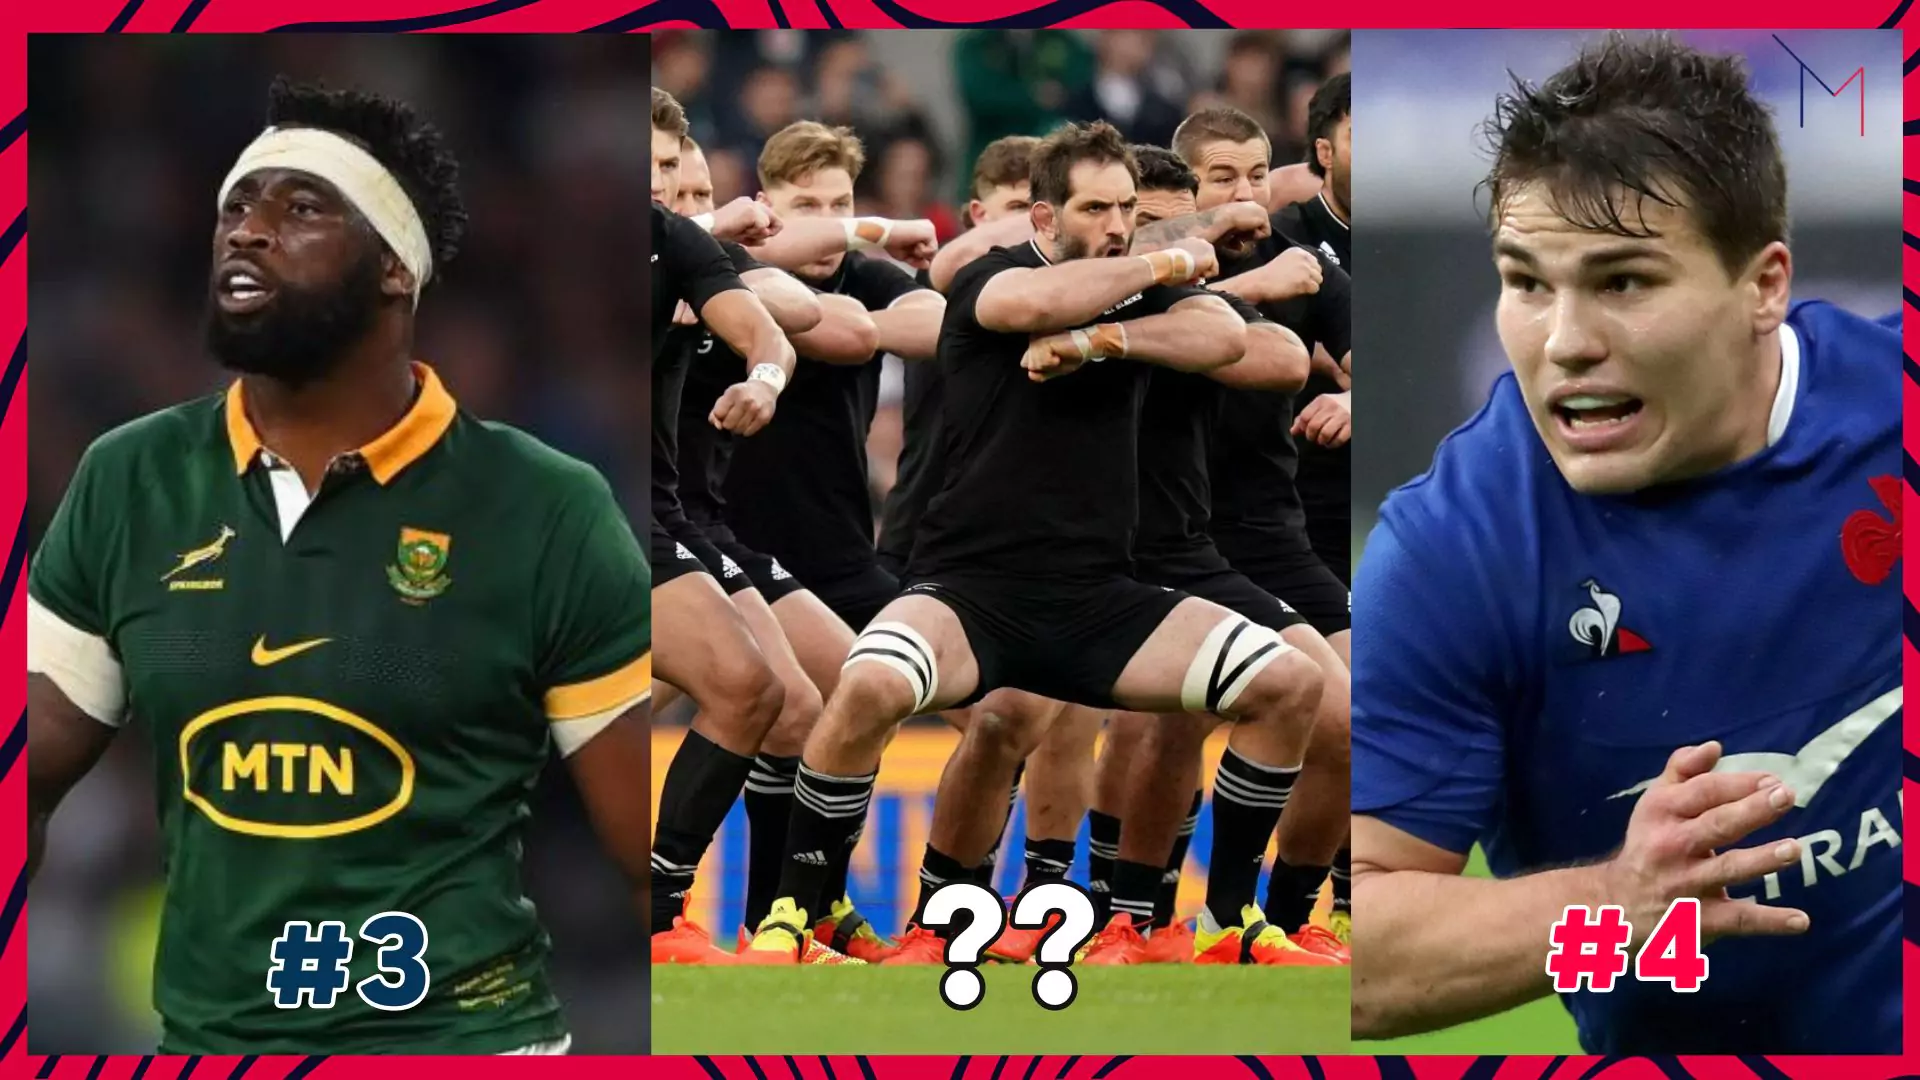 most followed Rugby Union teams on Instagram